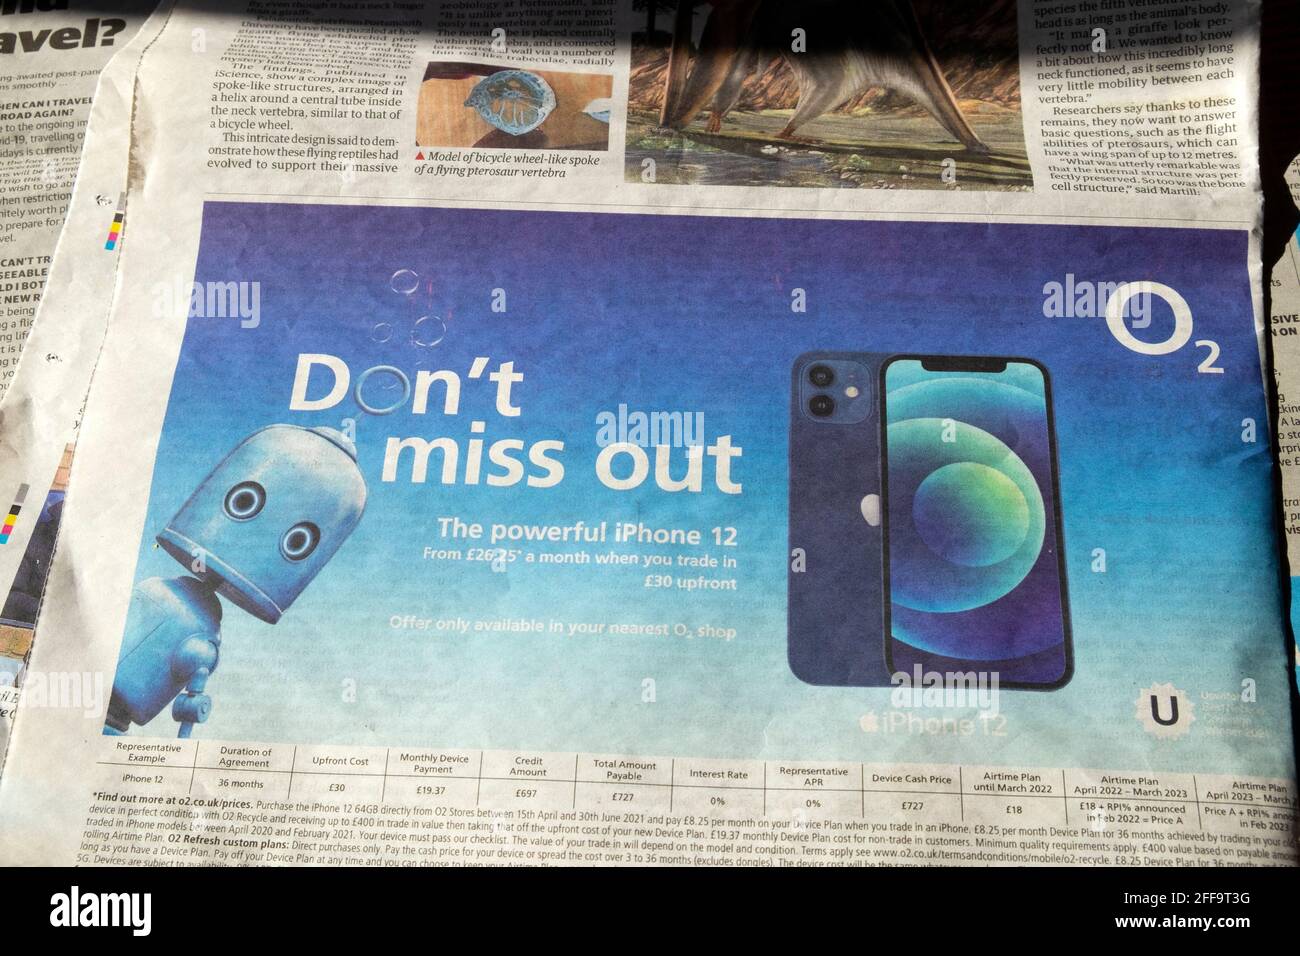 Don't miss out" O2 newspaper advertisement advert with iPhone 12 24 April  2021 Stock Photo - Alamy